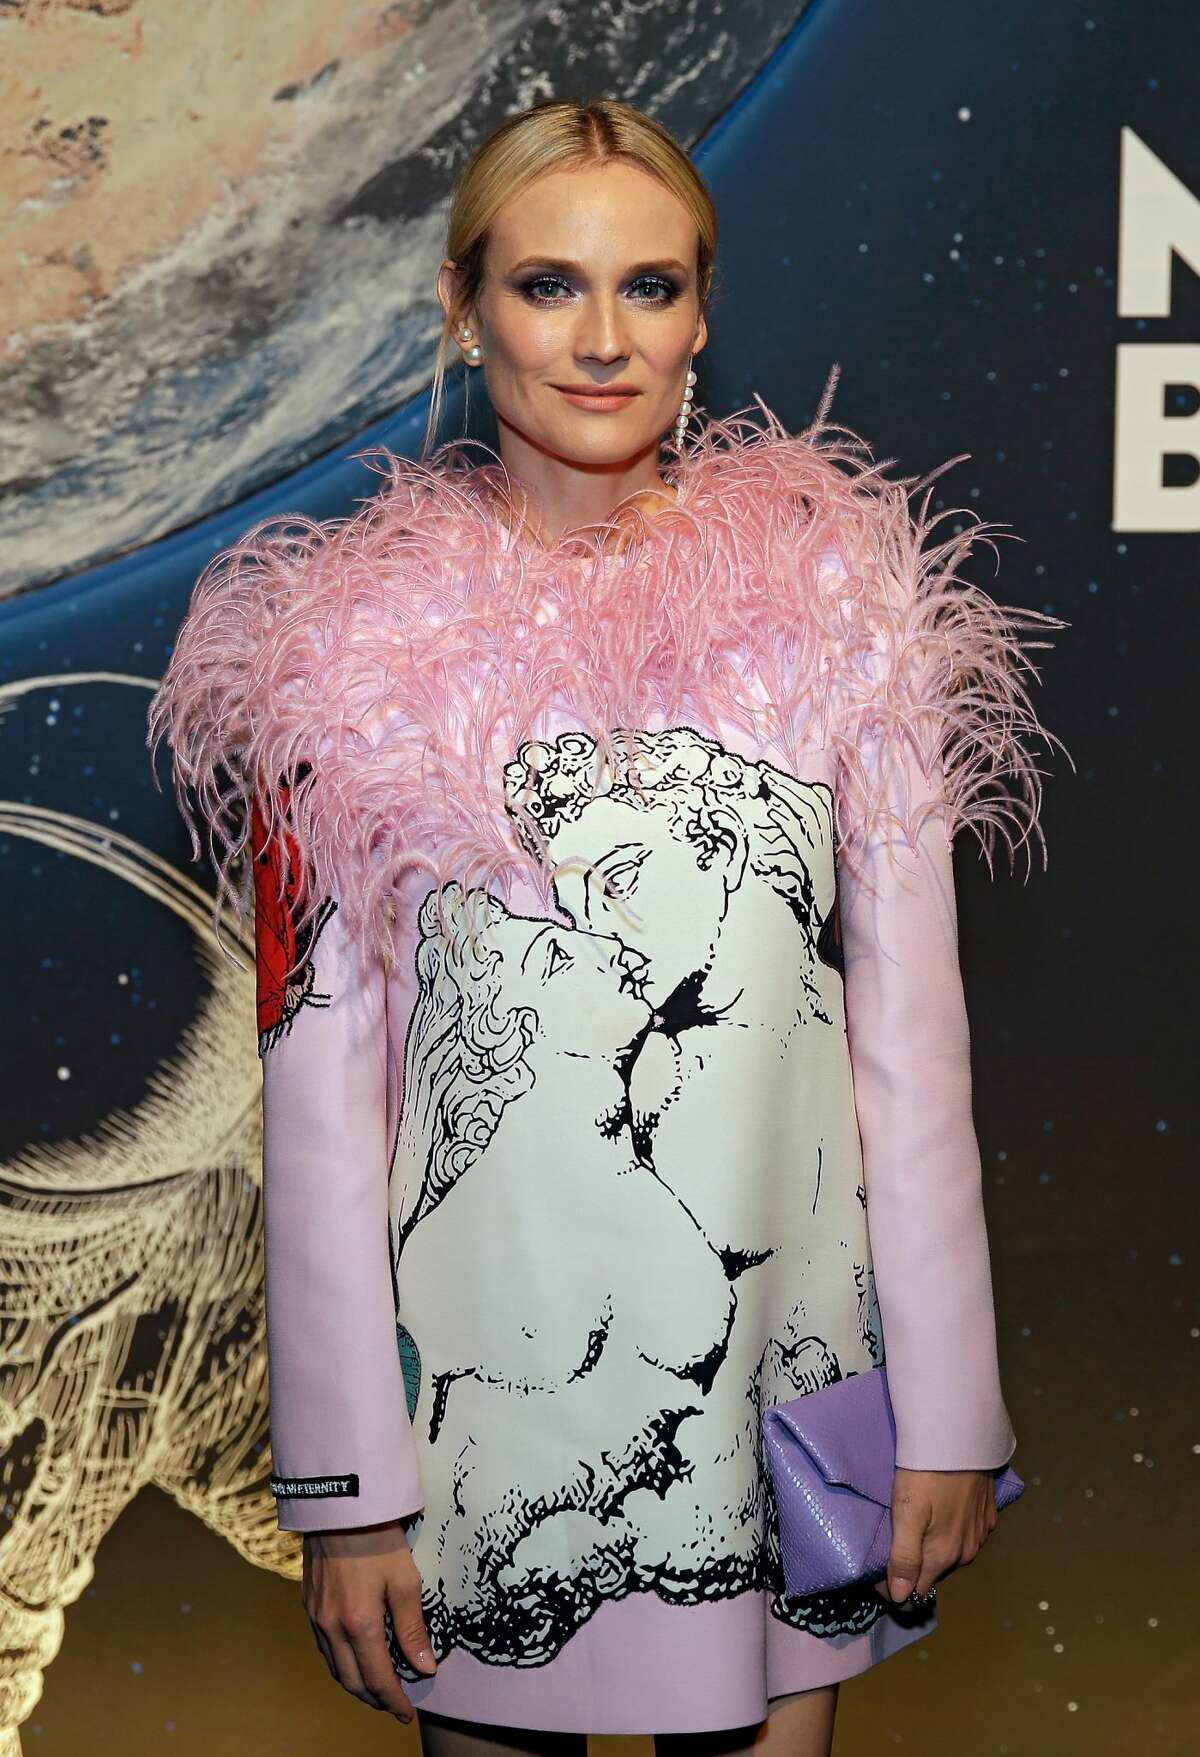 Diane Kruger at the Montblanc StarWaker Event celebrating the 50th anniversary of the moon landing at the Lone Star Flight Museum.